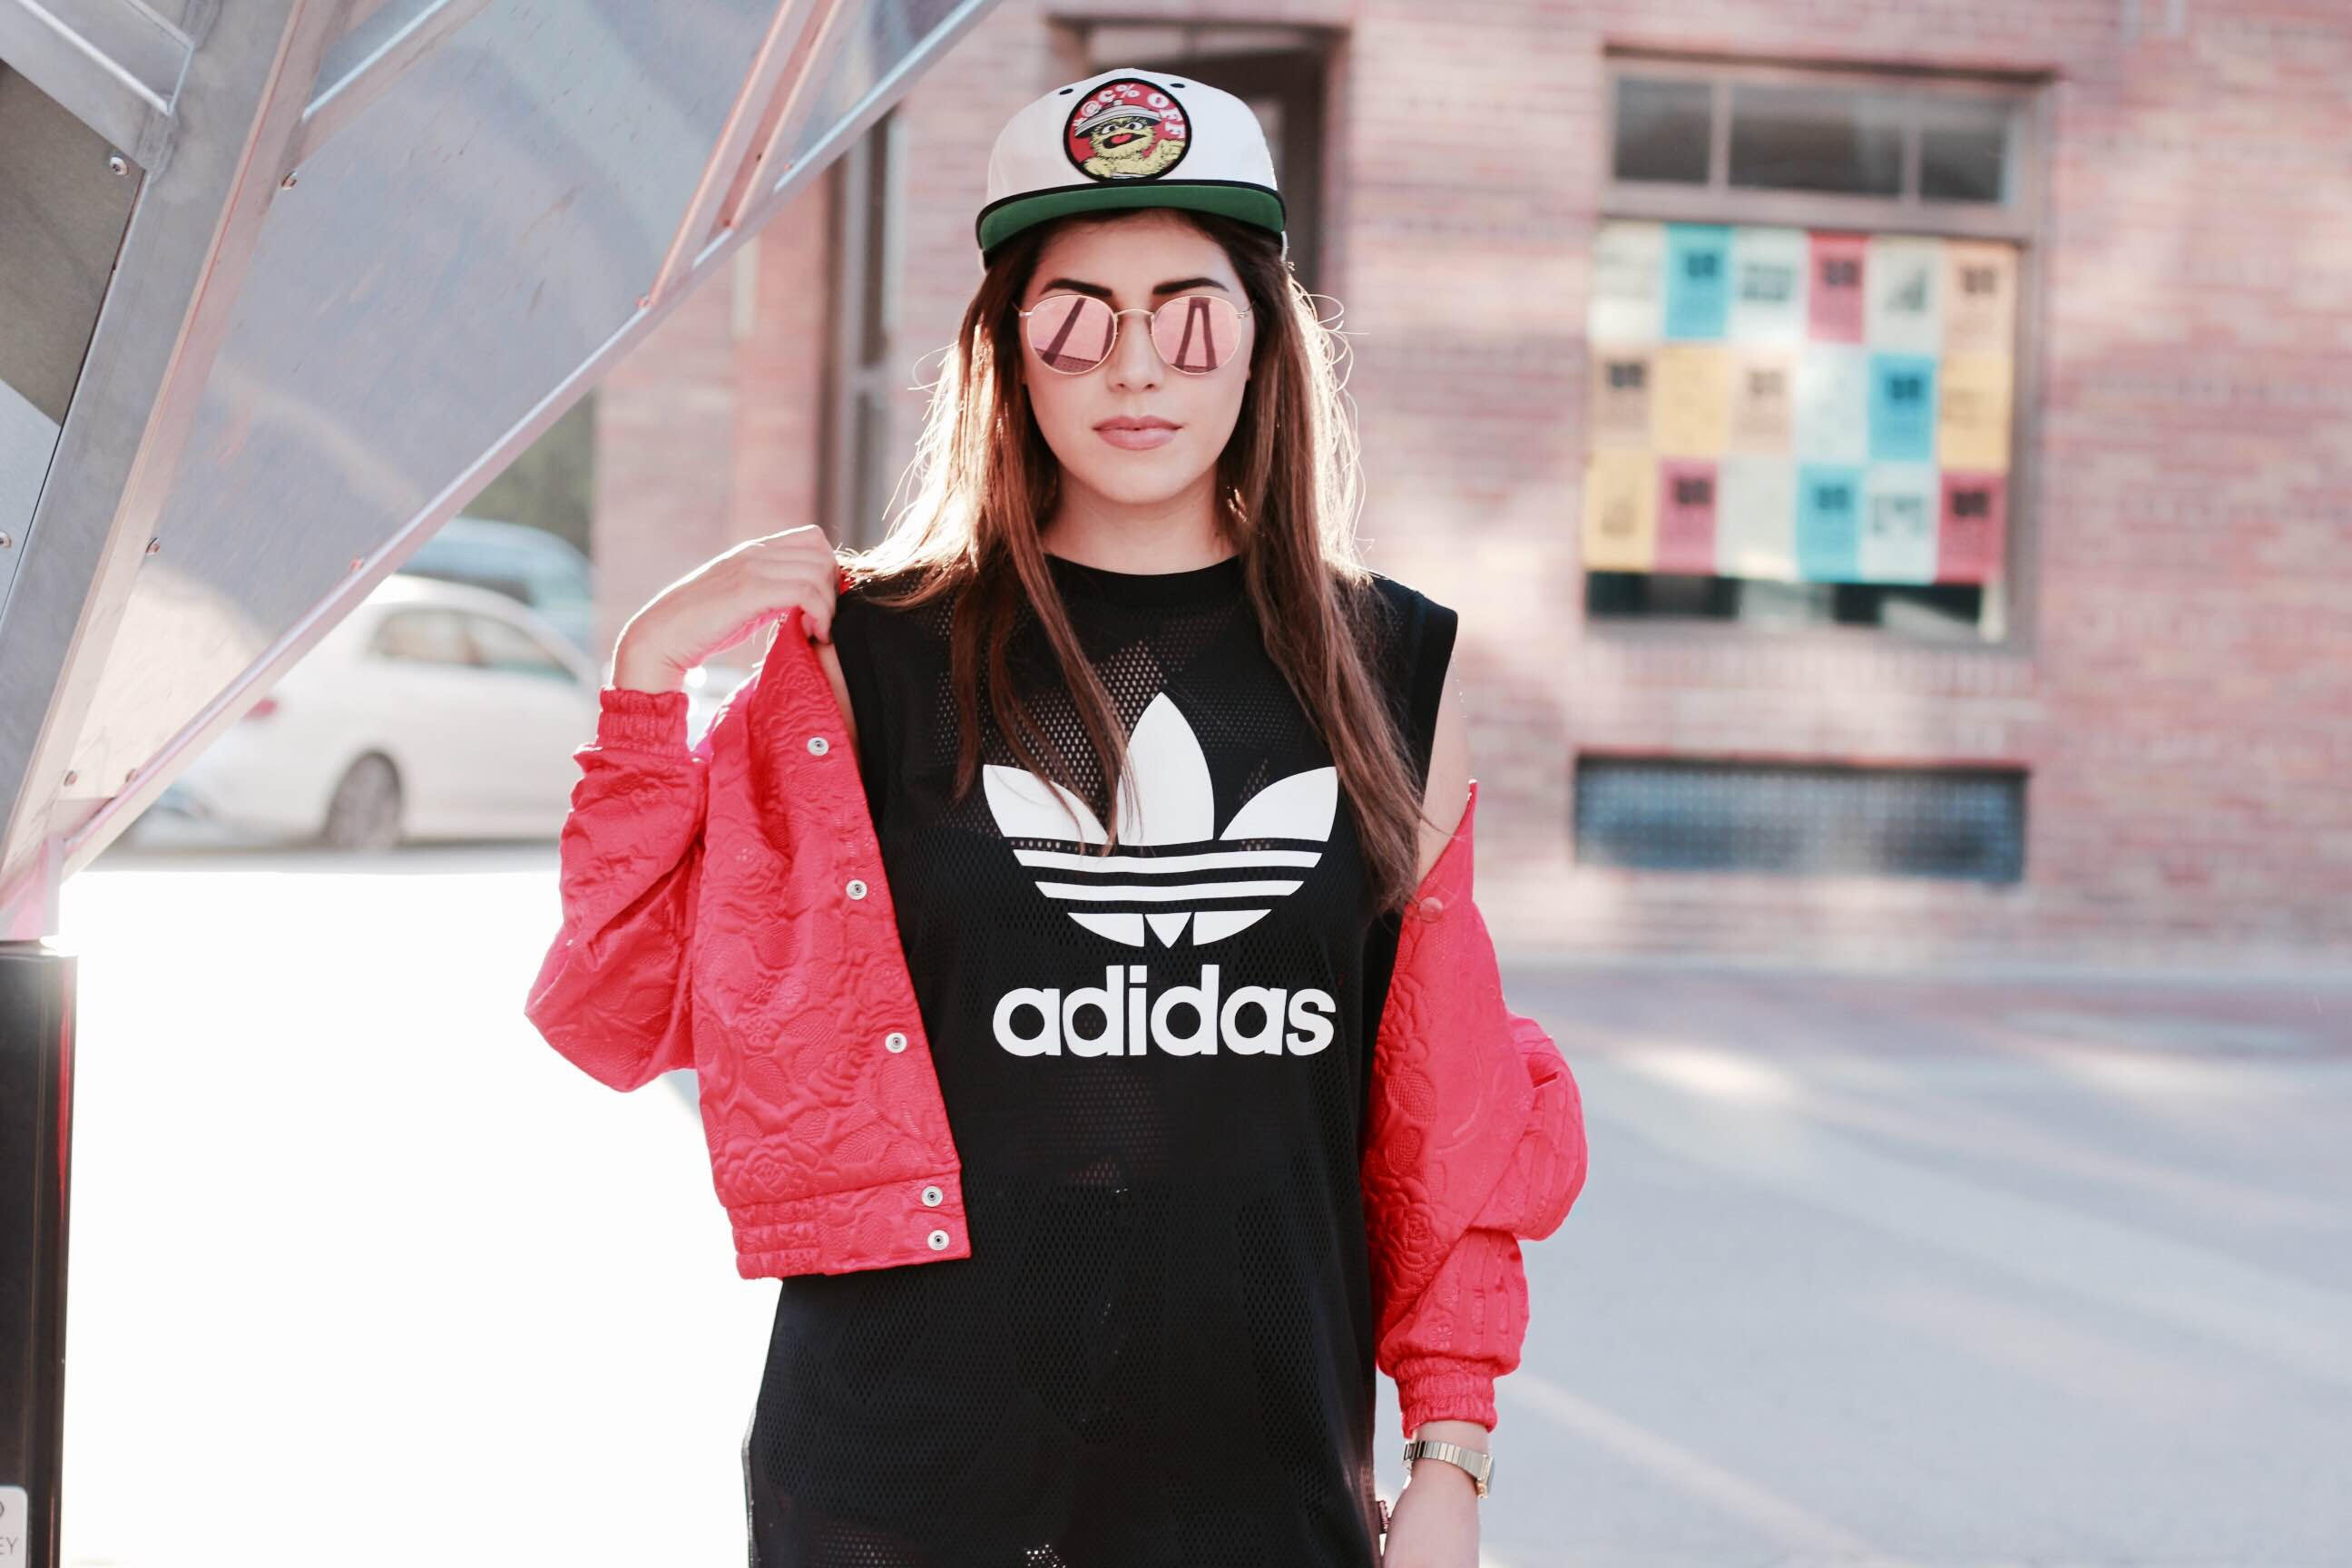 Mexico's DJ Jessica Audiffred in adidas shirt and pink jacket